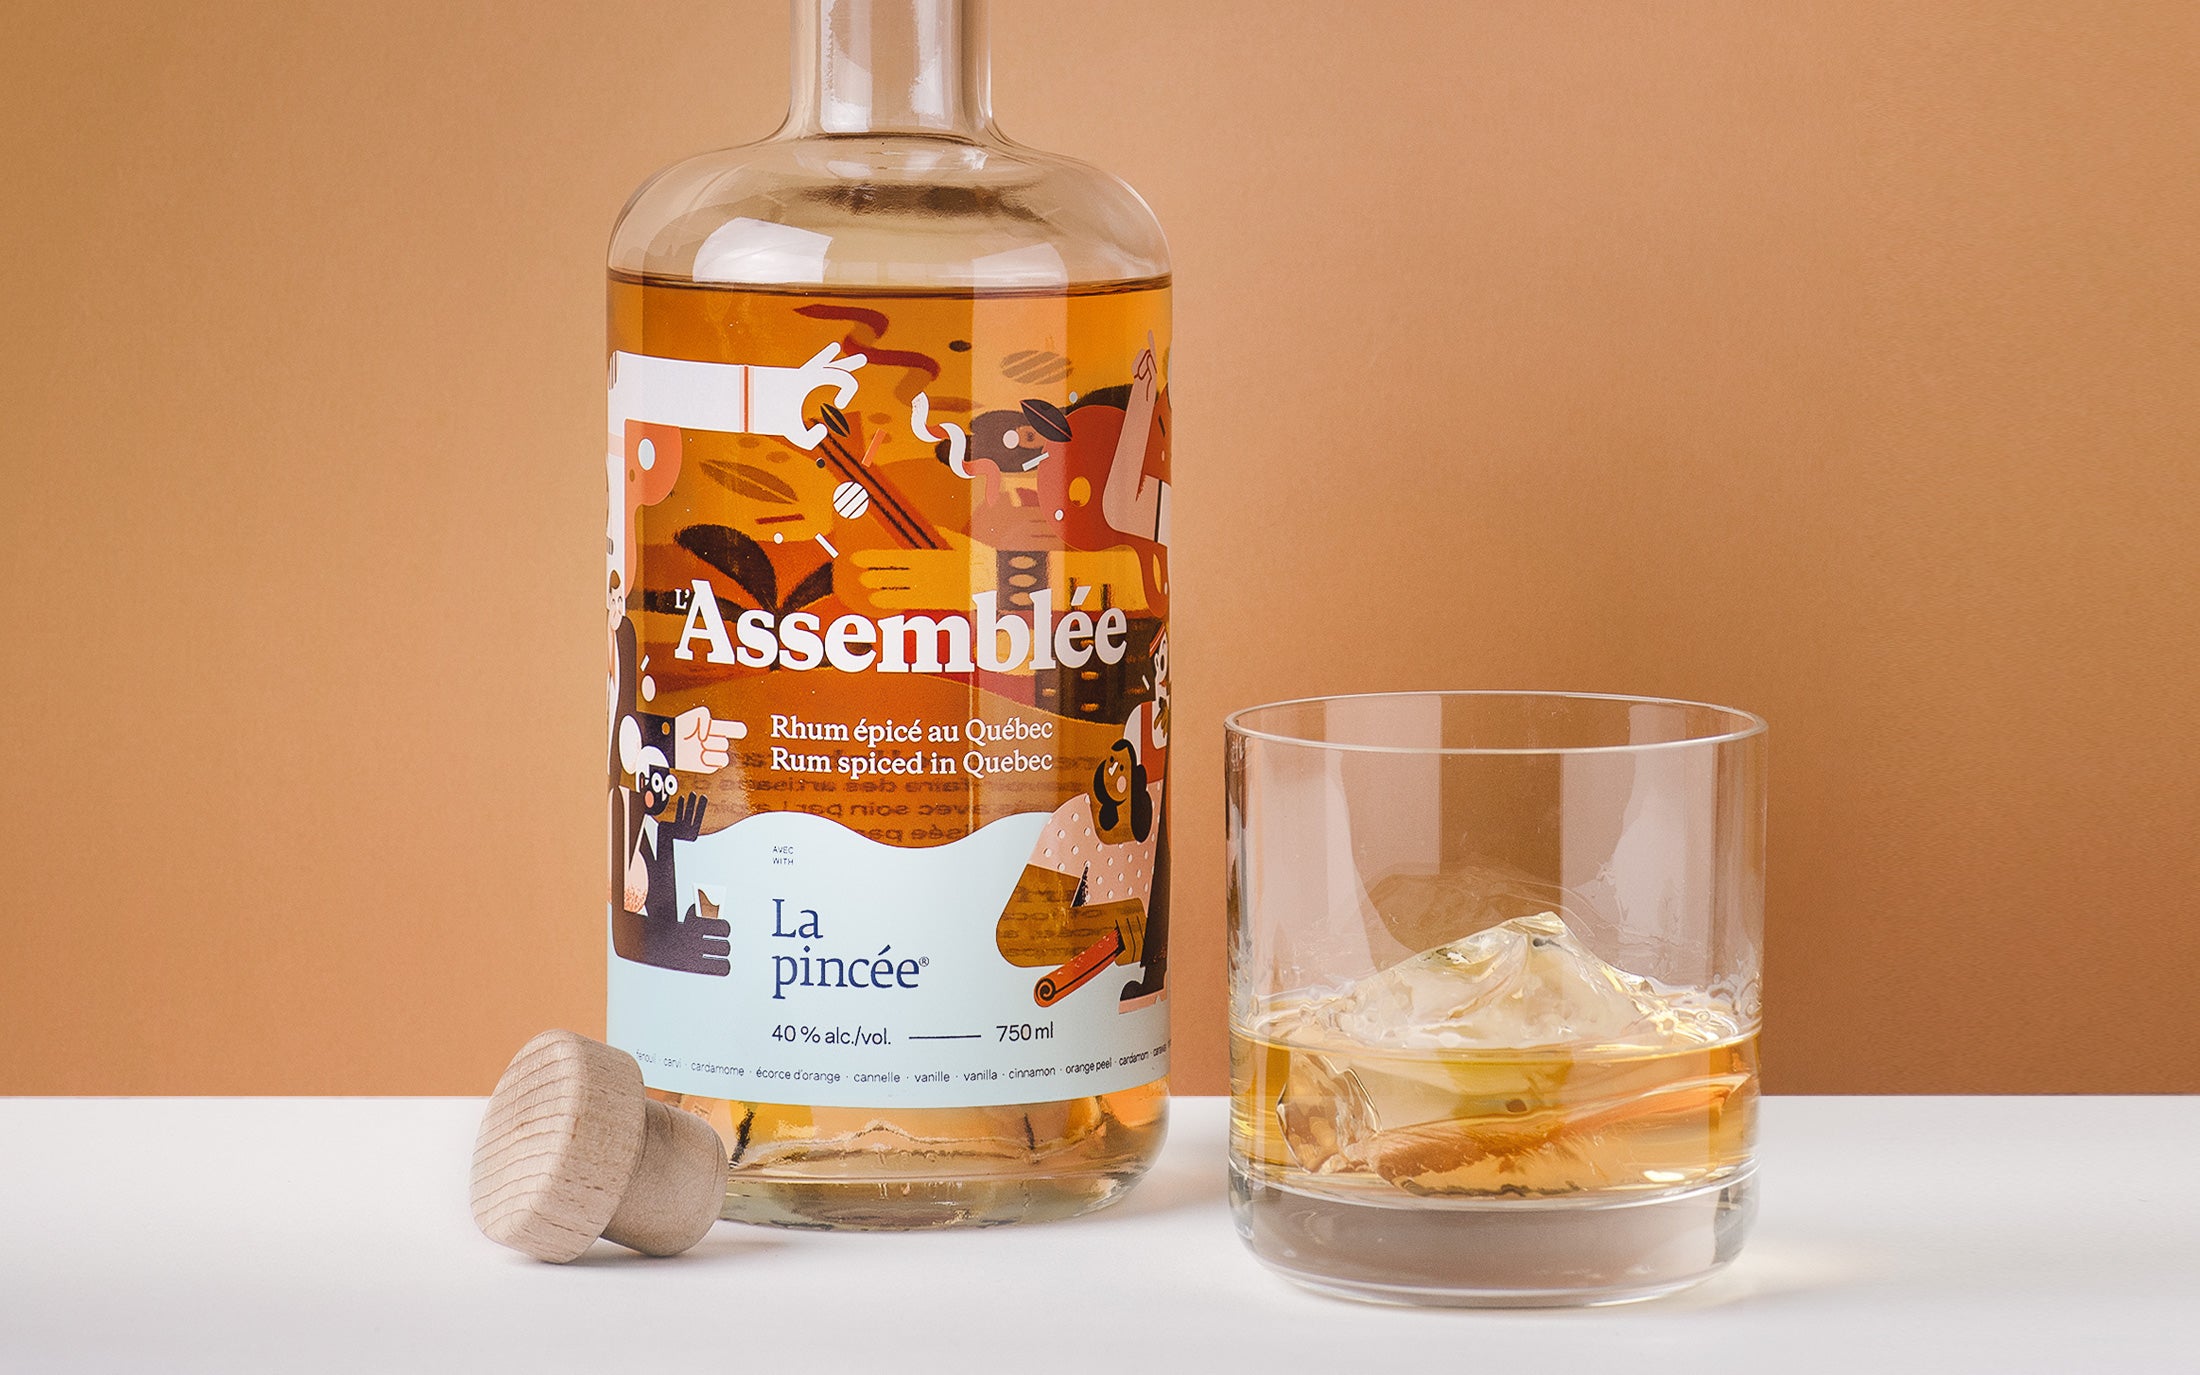 The Assembly spiced rum